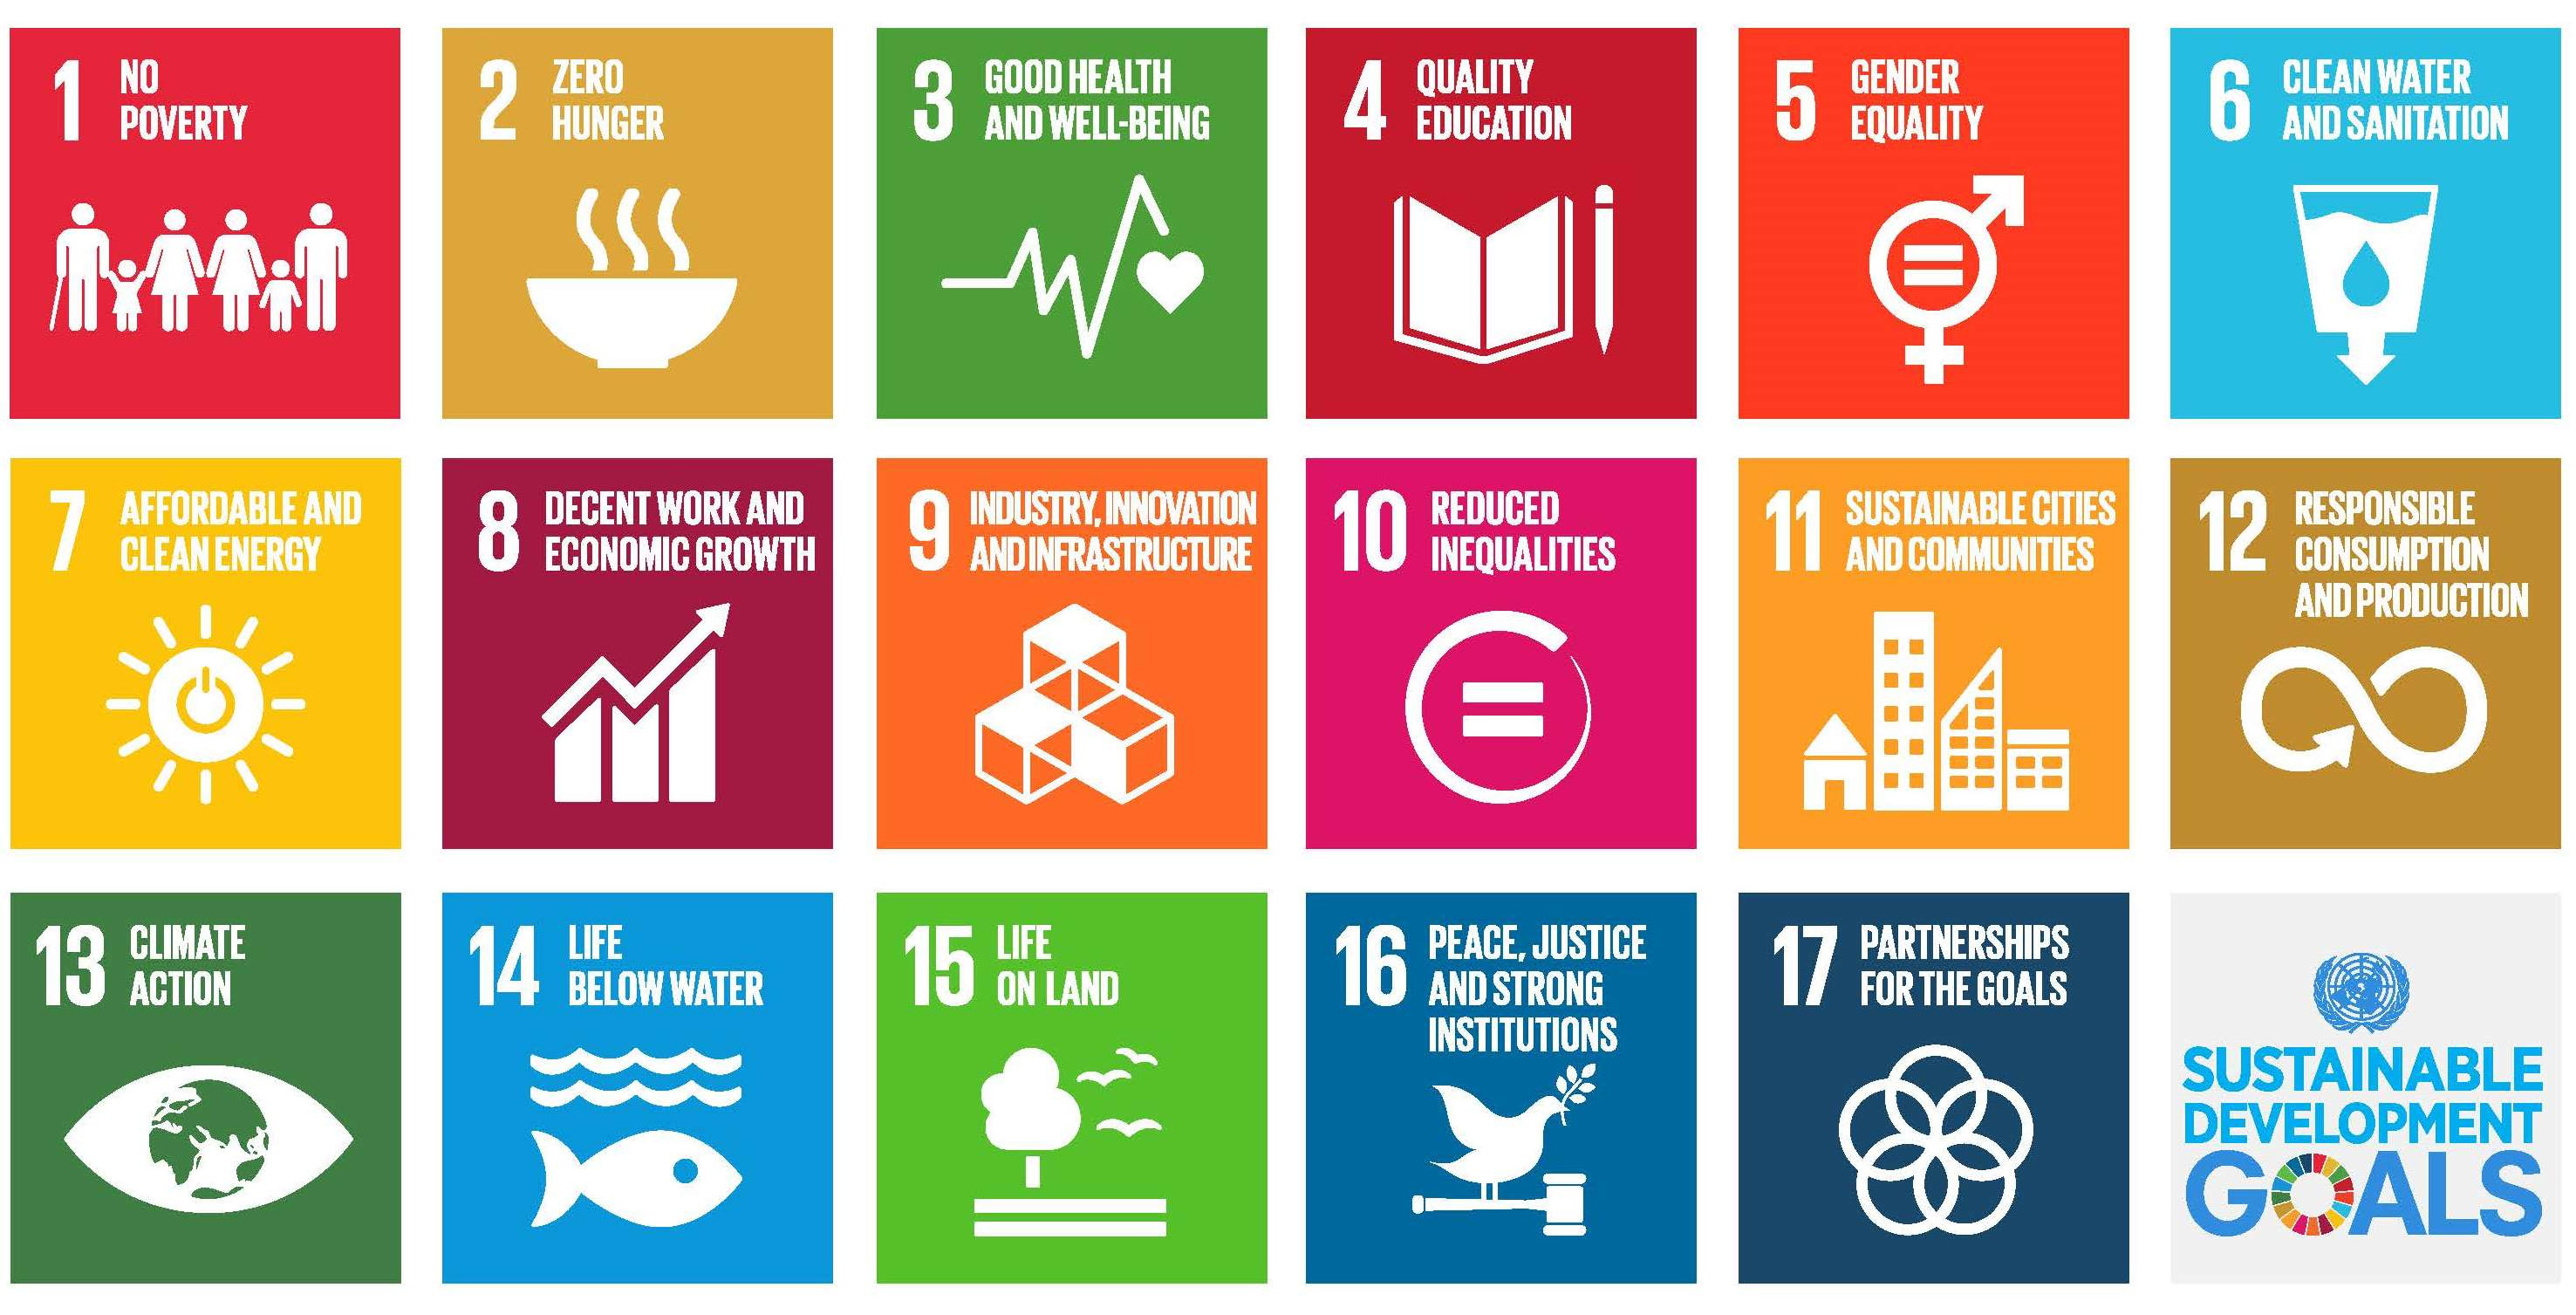 The SDGS aim to provide a global shared blueprint for peace and prosperity for people and the planet.